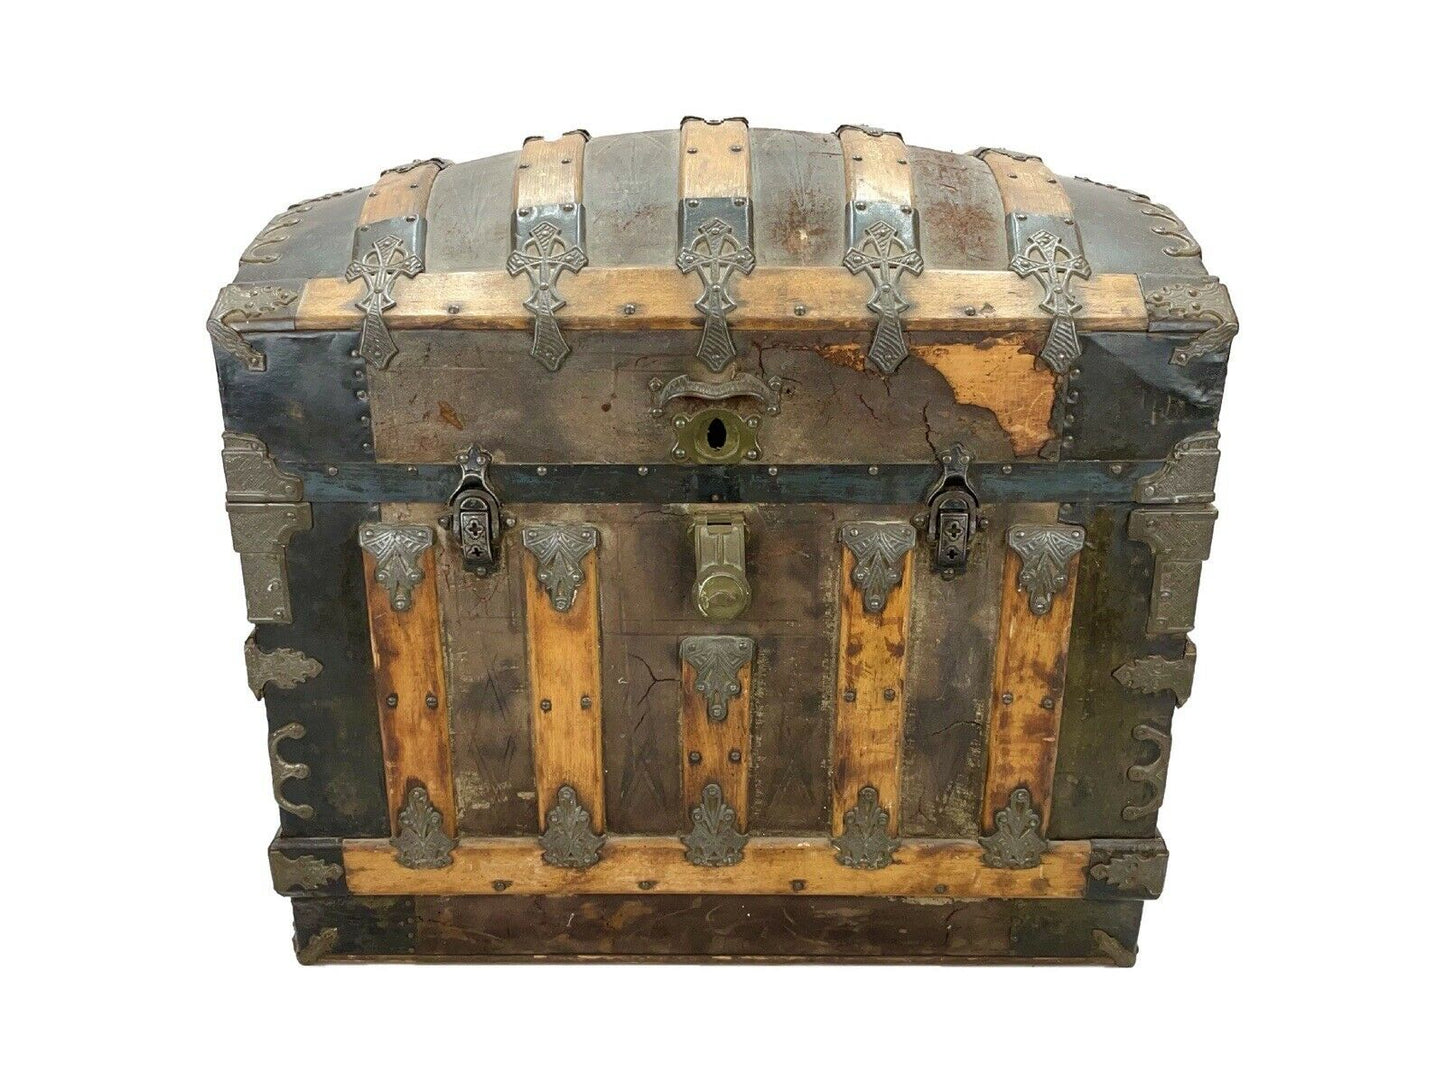 A 19th Century, Dome Topped, Iron Bound Steamer Trunk / Chest With Original Interior